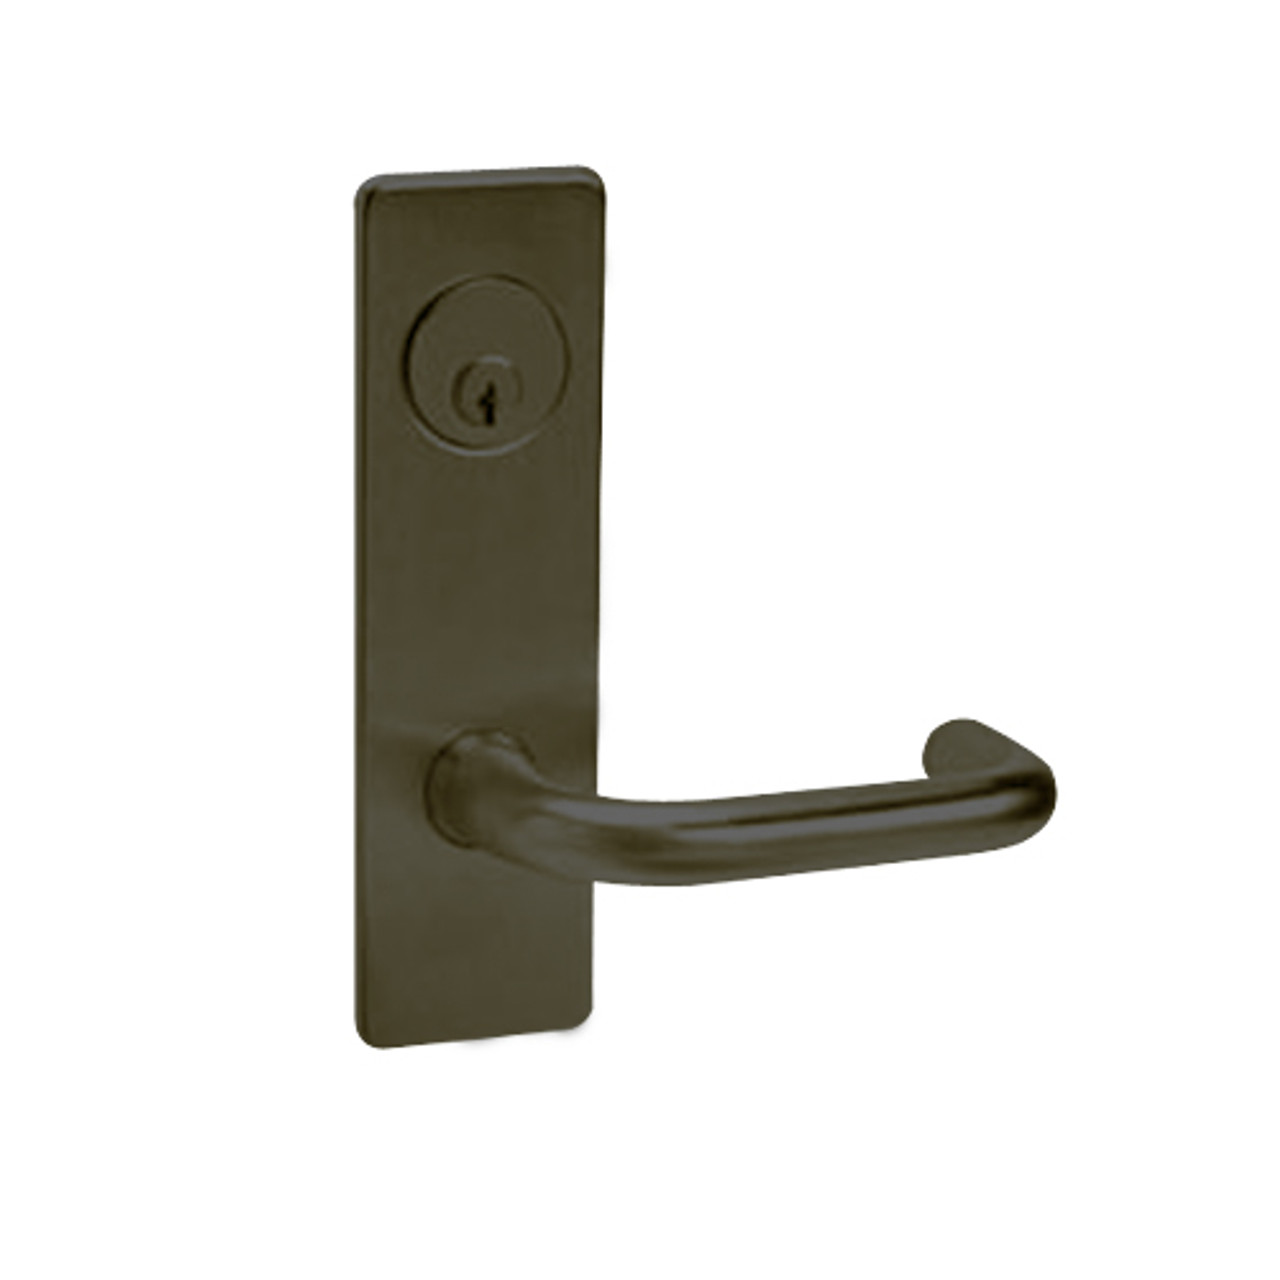 ML2002-LSR-613 Corbin Russwin ML2000 Series Mortise Classroom Intruder Locksets with Lustra Lever in Oil Rubbed Bronze